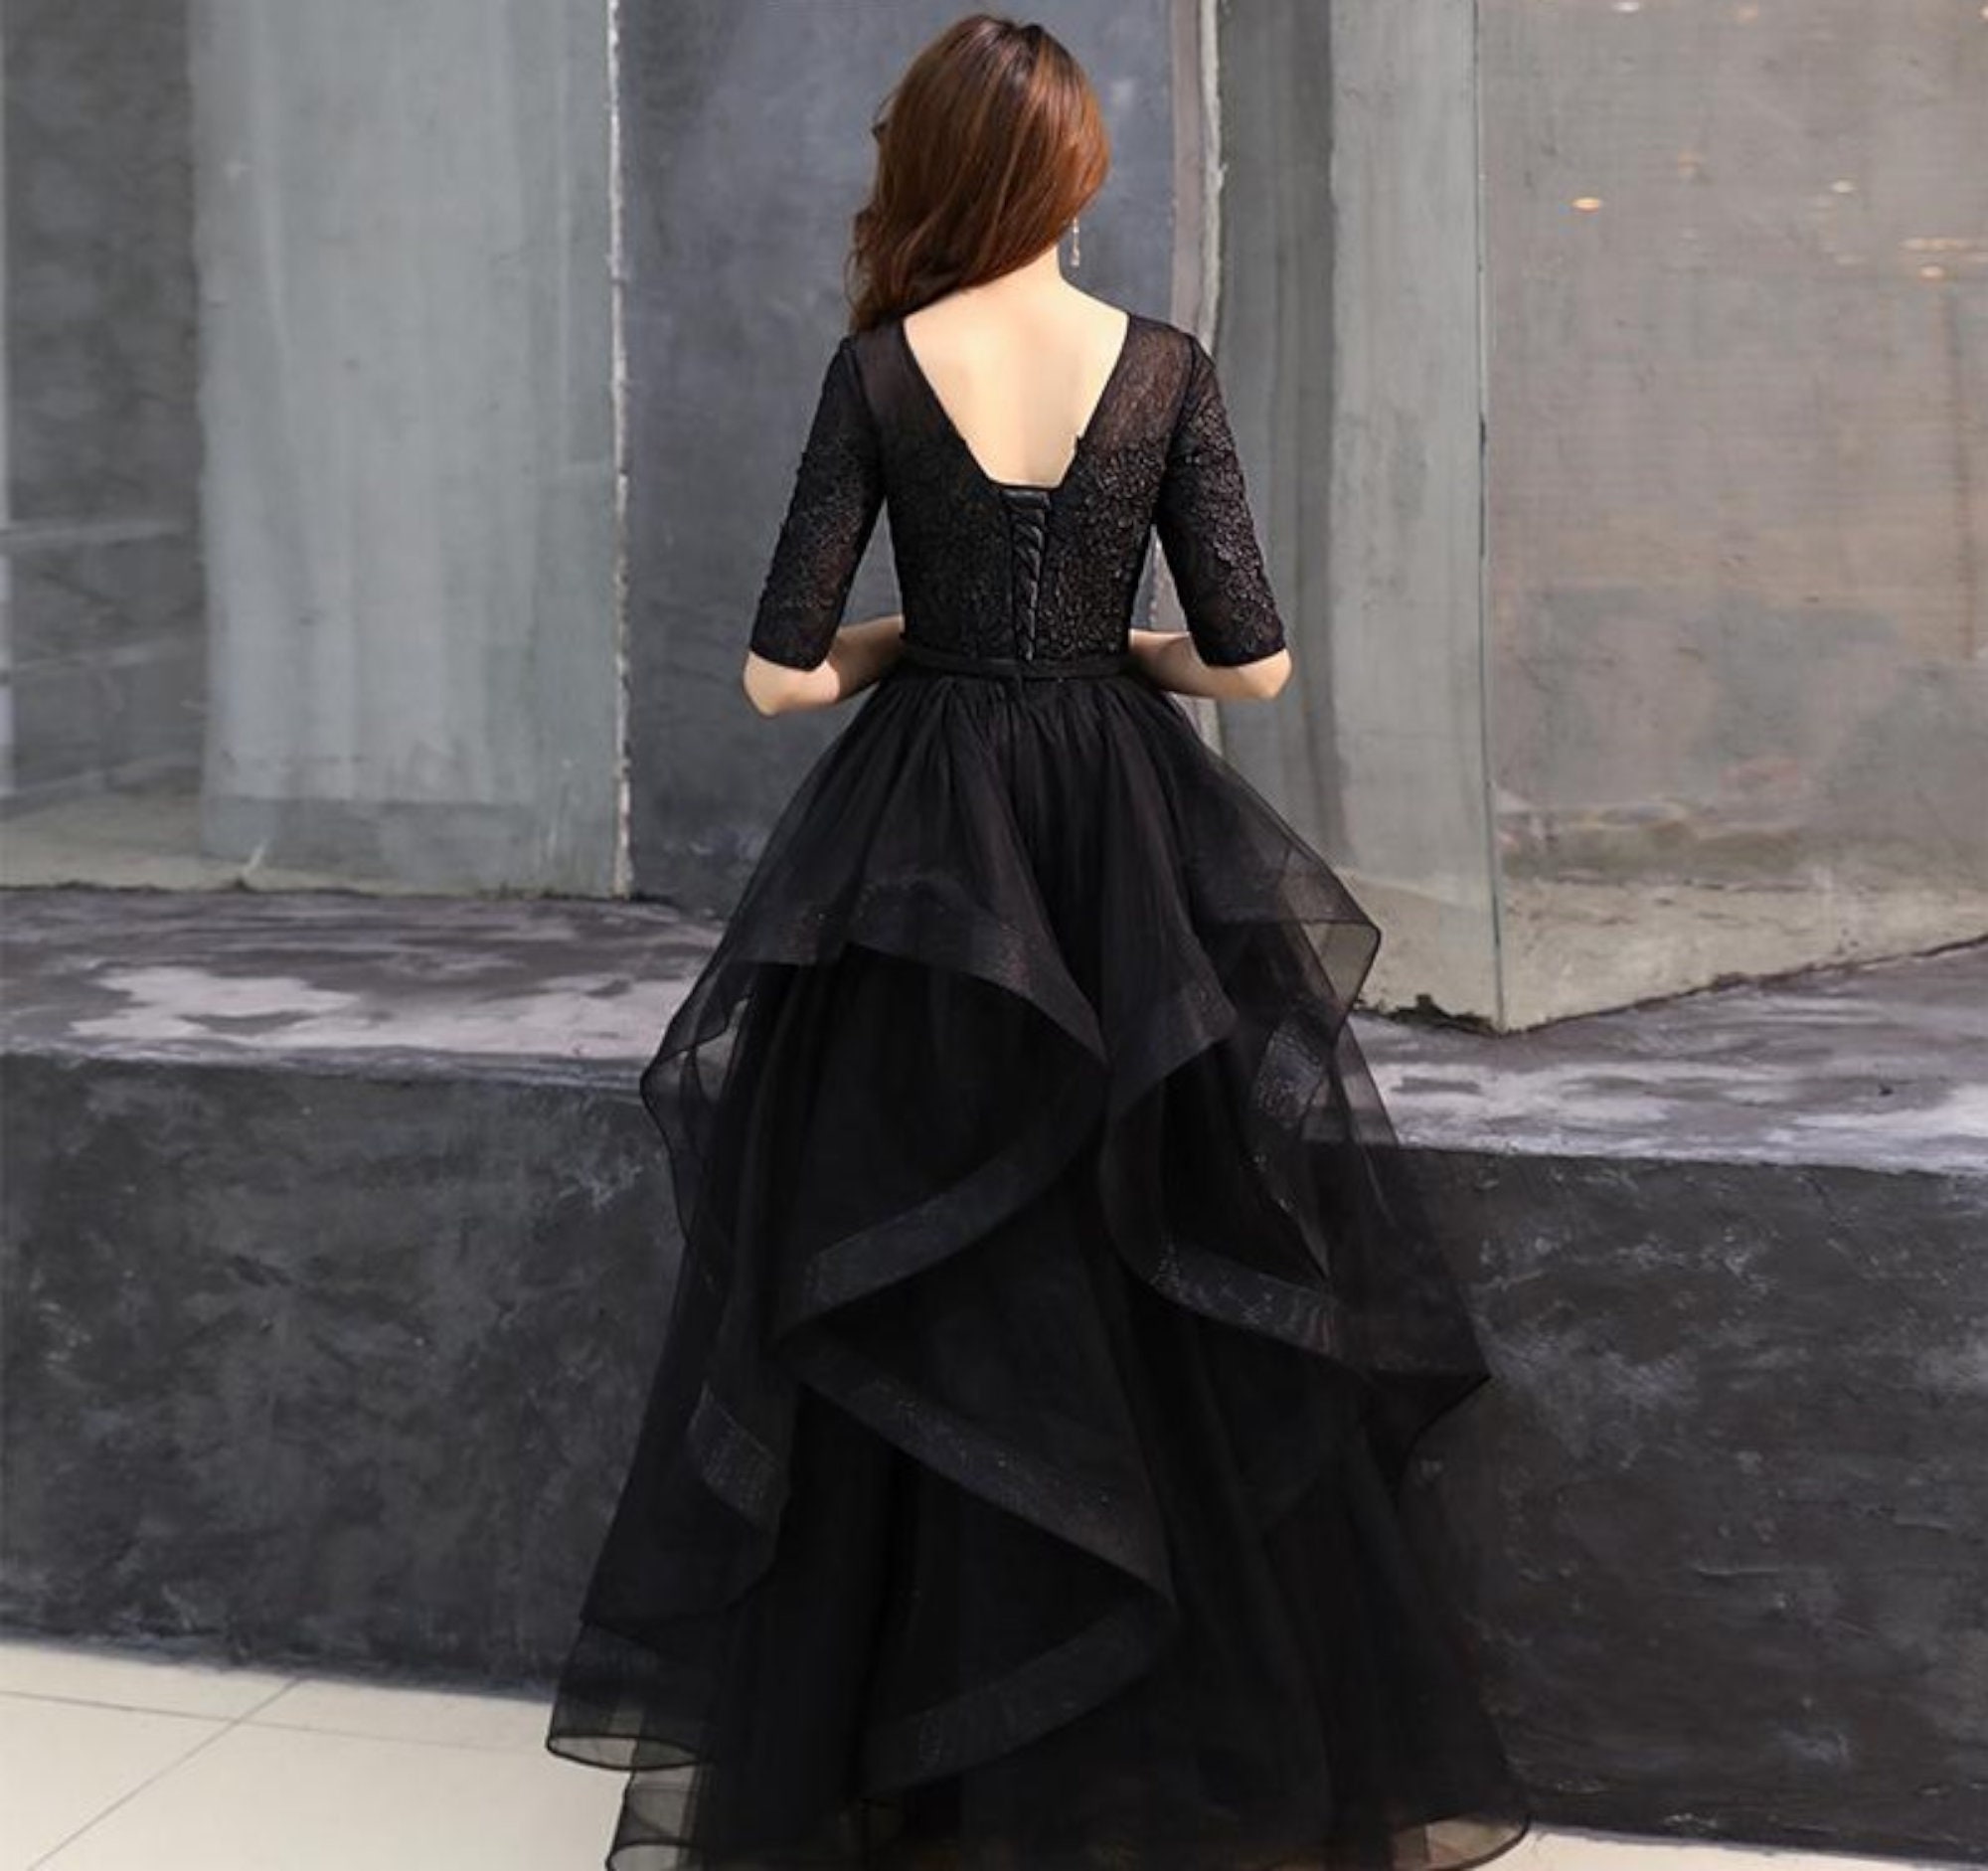 Unusual Black Satin Gothic Long Prom Dress or Evening Gown - Etsy